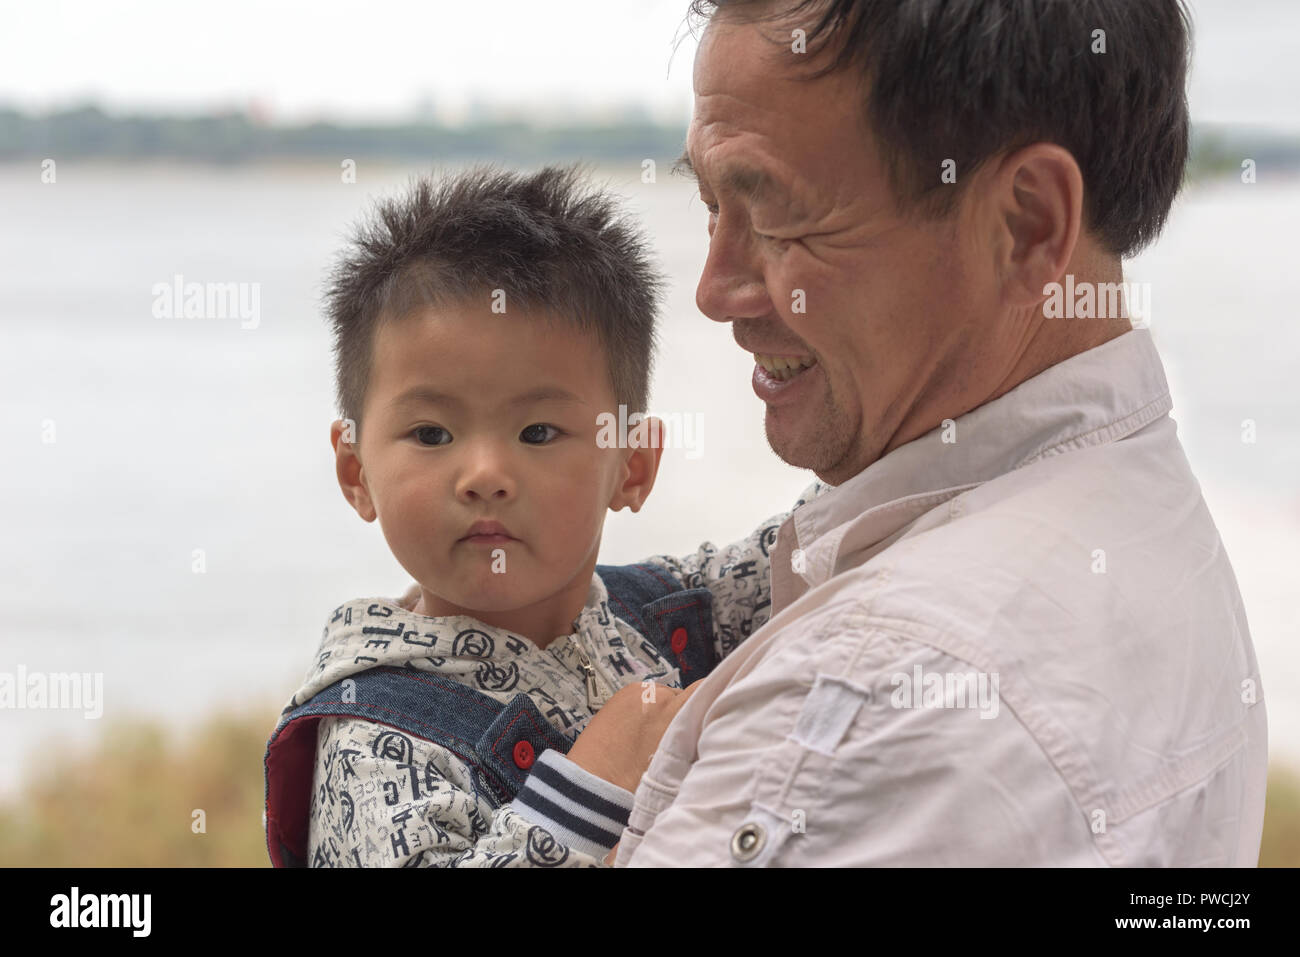 Harbin, Heilongjiang, China - September 2018: Portrait of Asian boy and grandfather. Grandfather with grandson Stock Photo